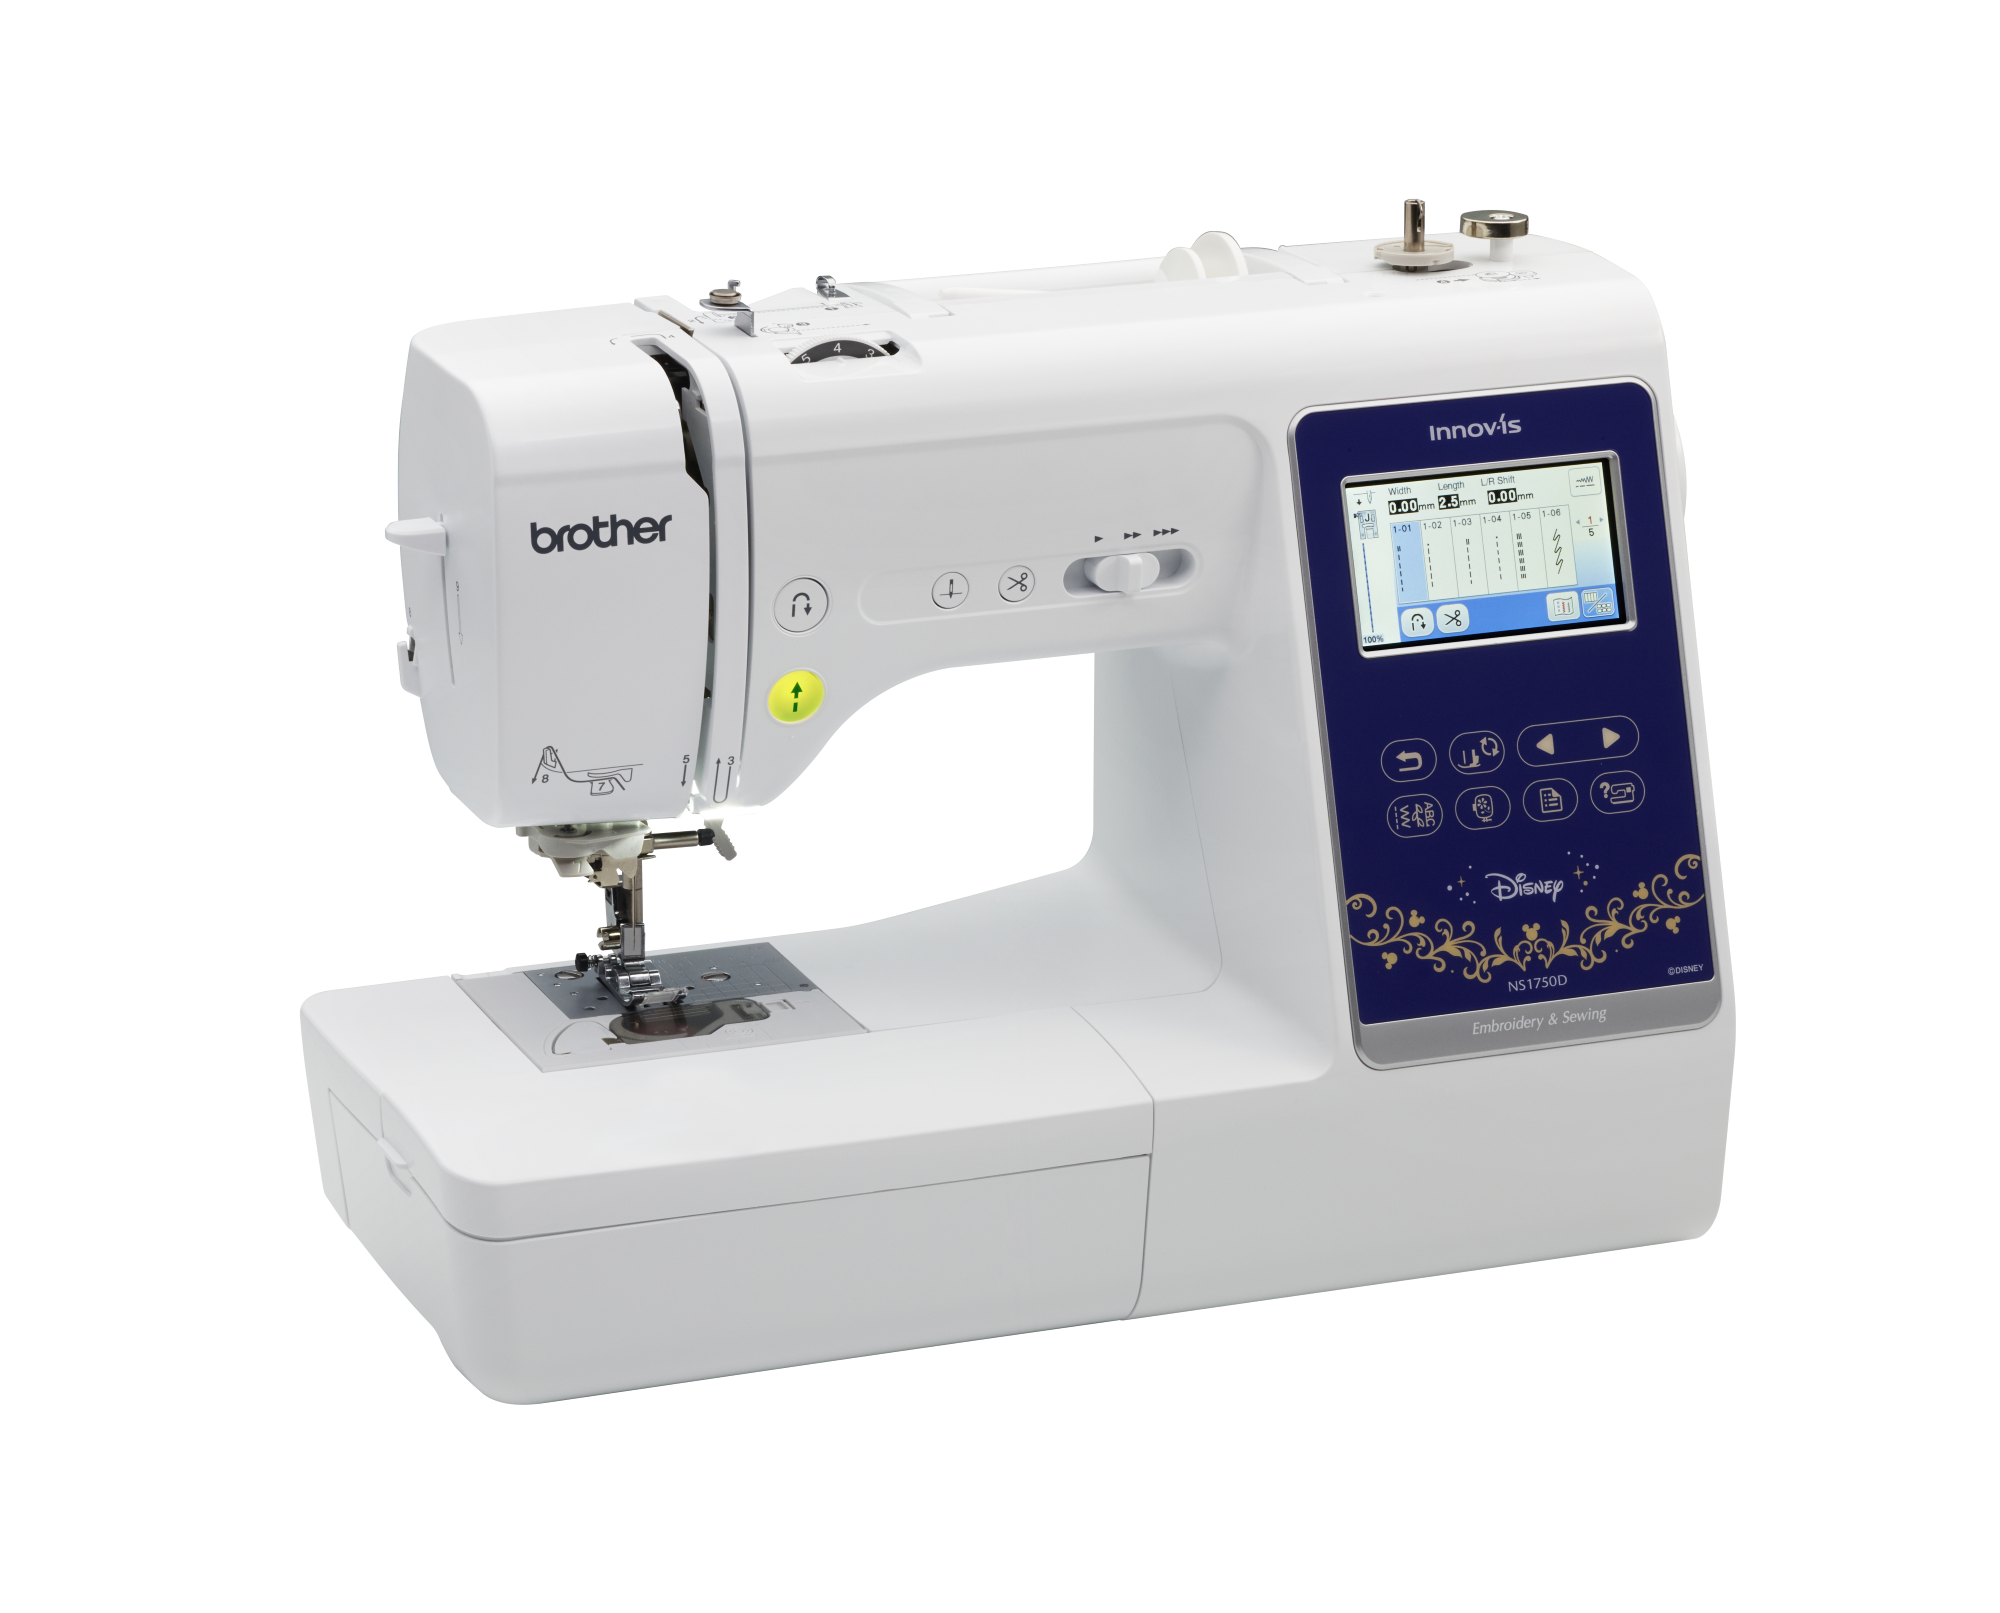 angled image of the Brother Innov-is NS1750D Sewing and Embroidery Machine 4x4